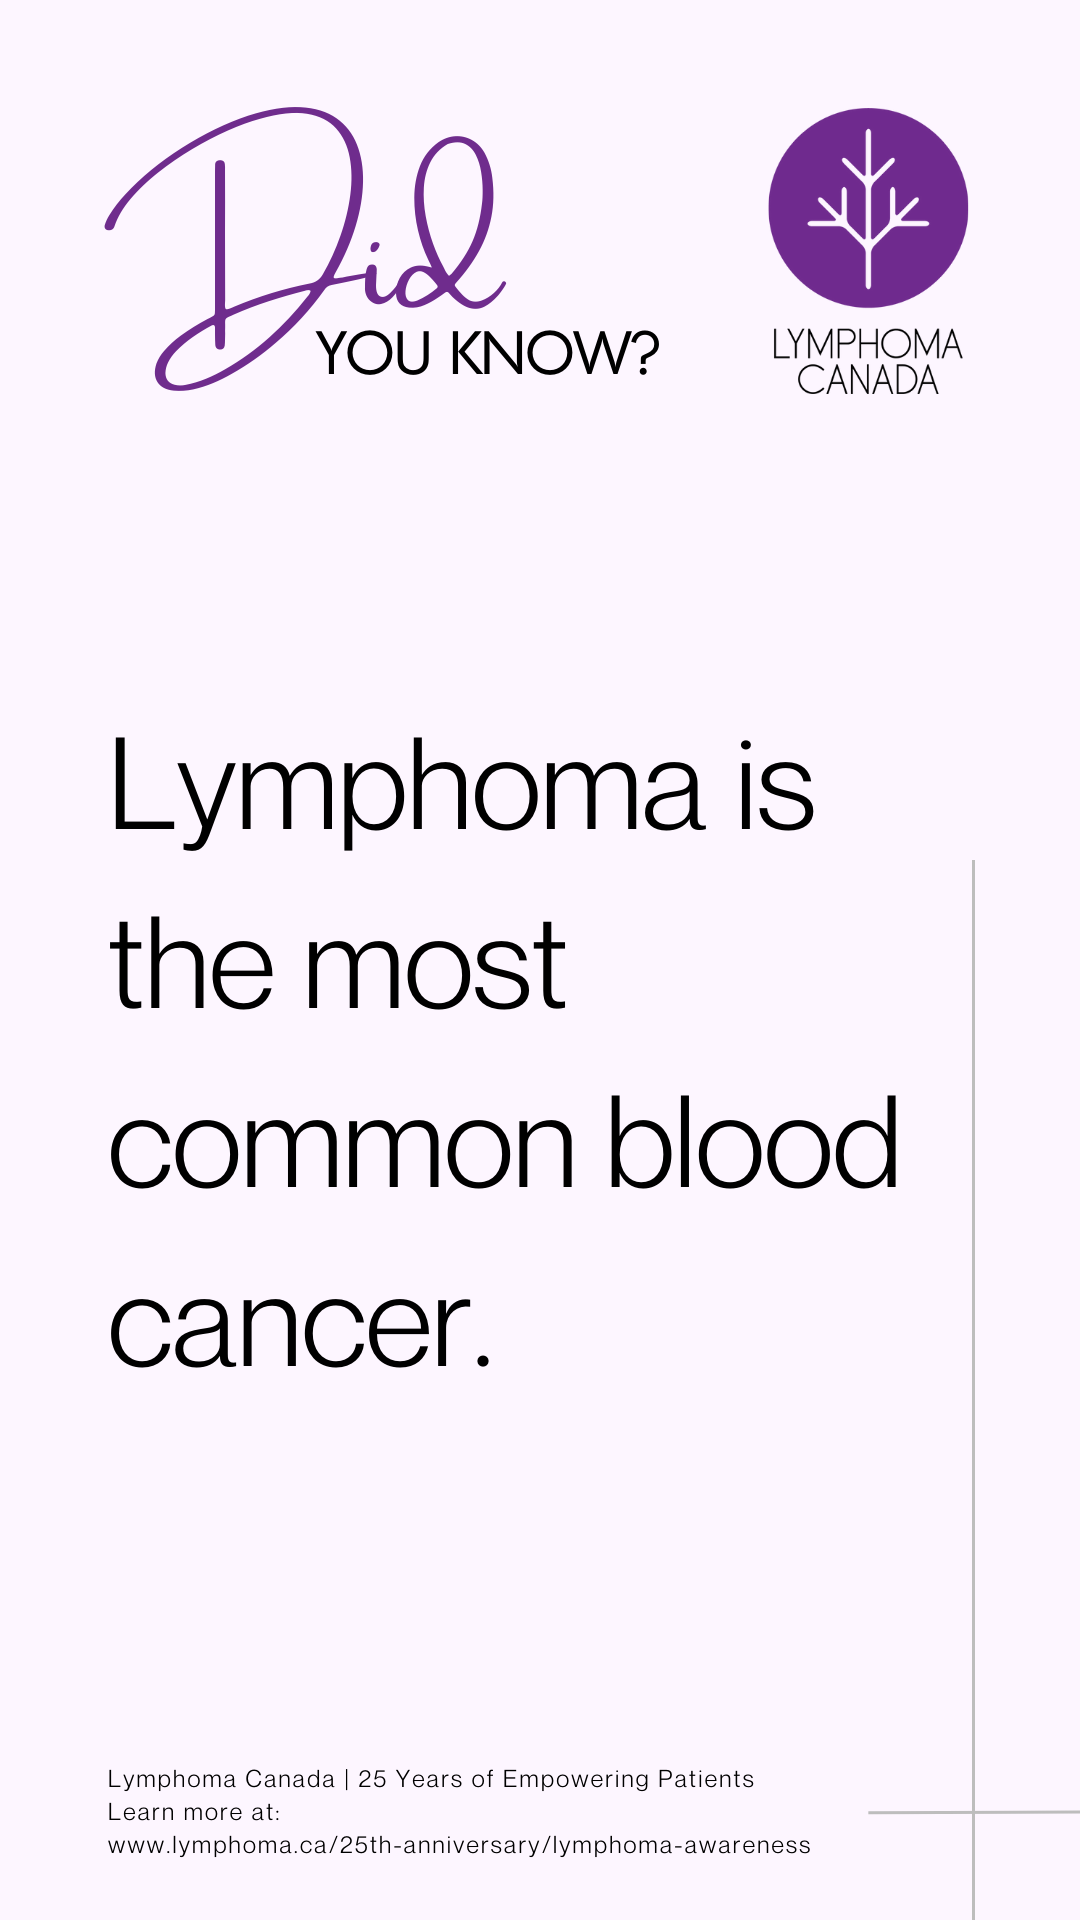 Story Infographic - Lymphoma is the most common blood cancer